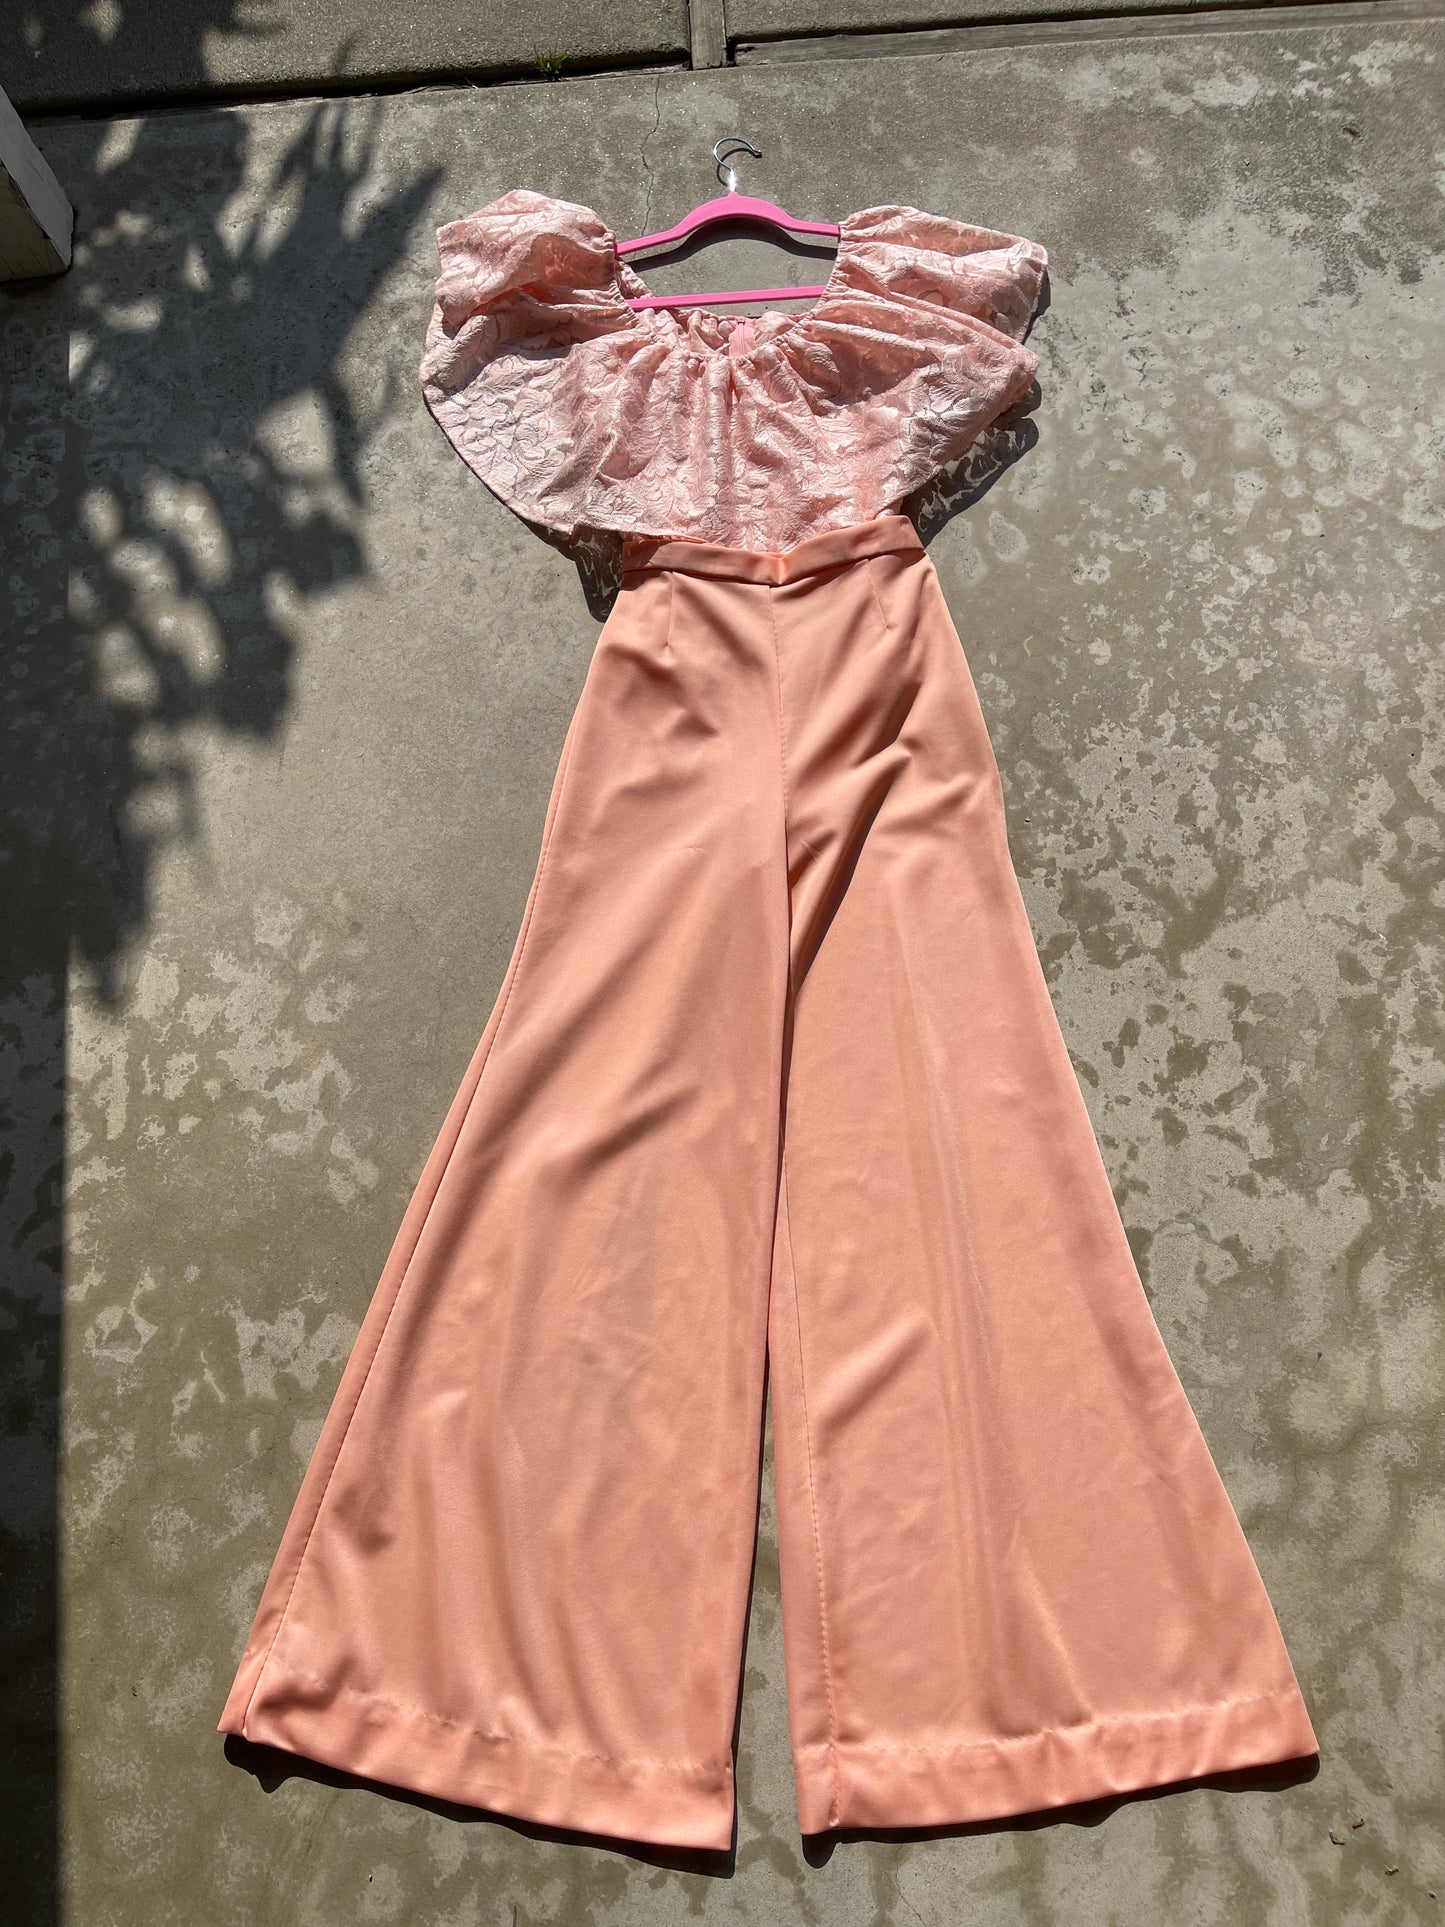 Vintage 70s / 80s Lace Sheer Rose Pink Romantic Ruffle Overlay Bodysuit Fits S-M & Possible Size L